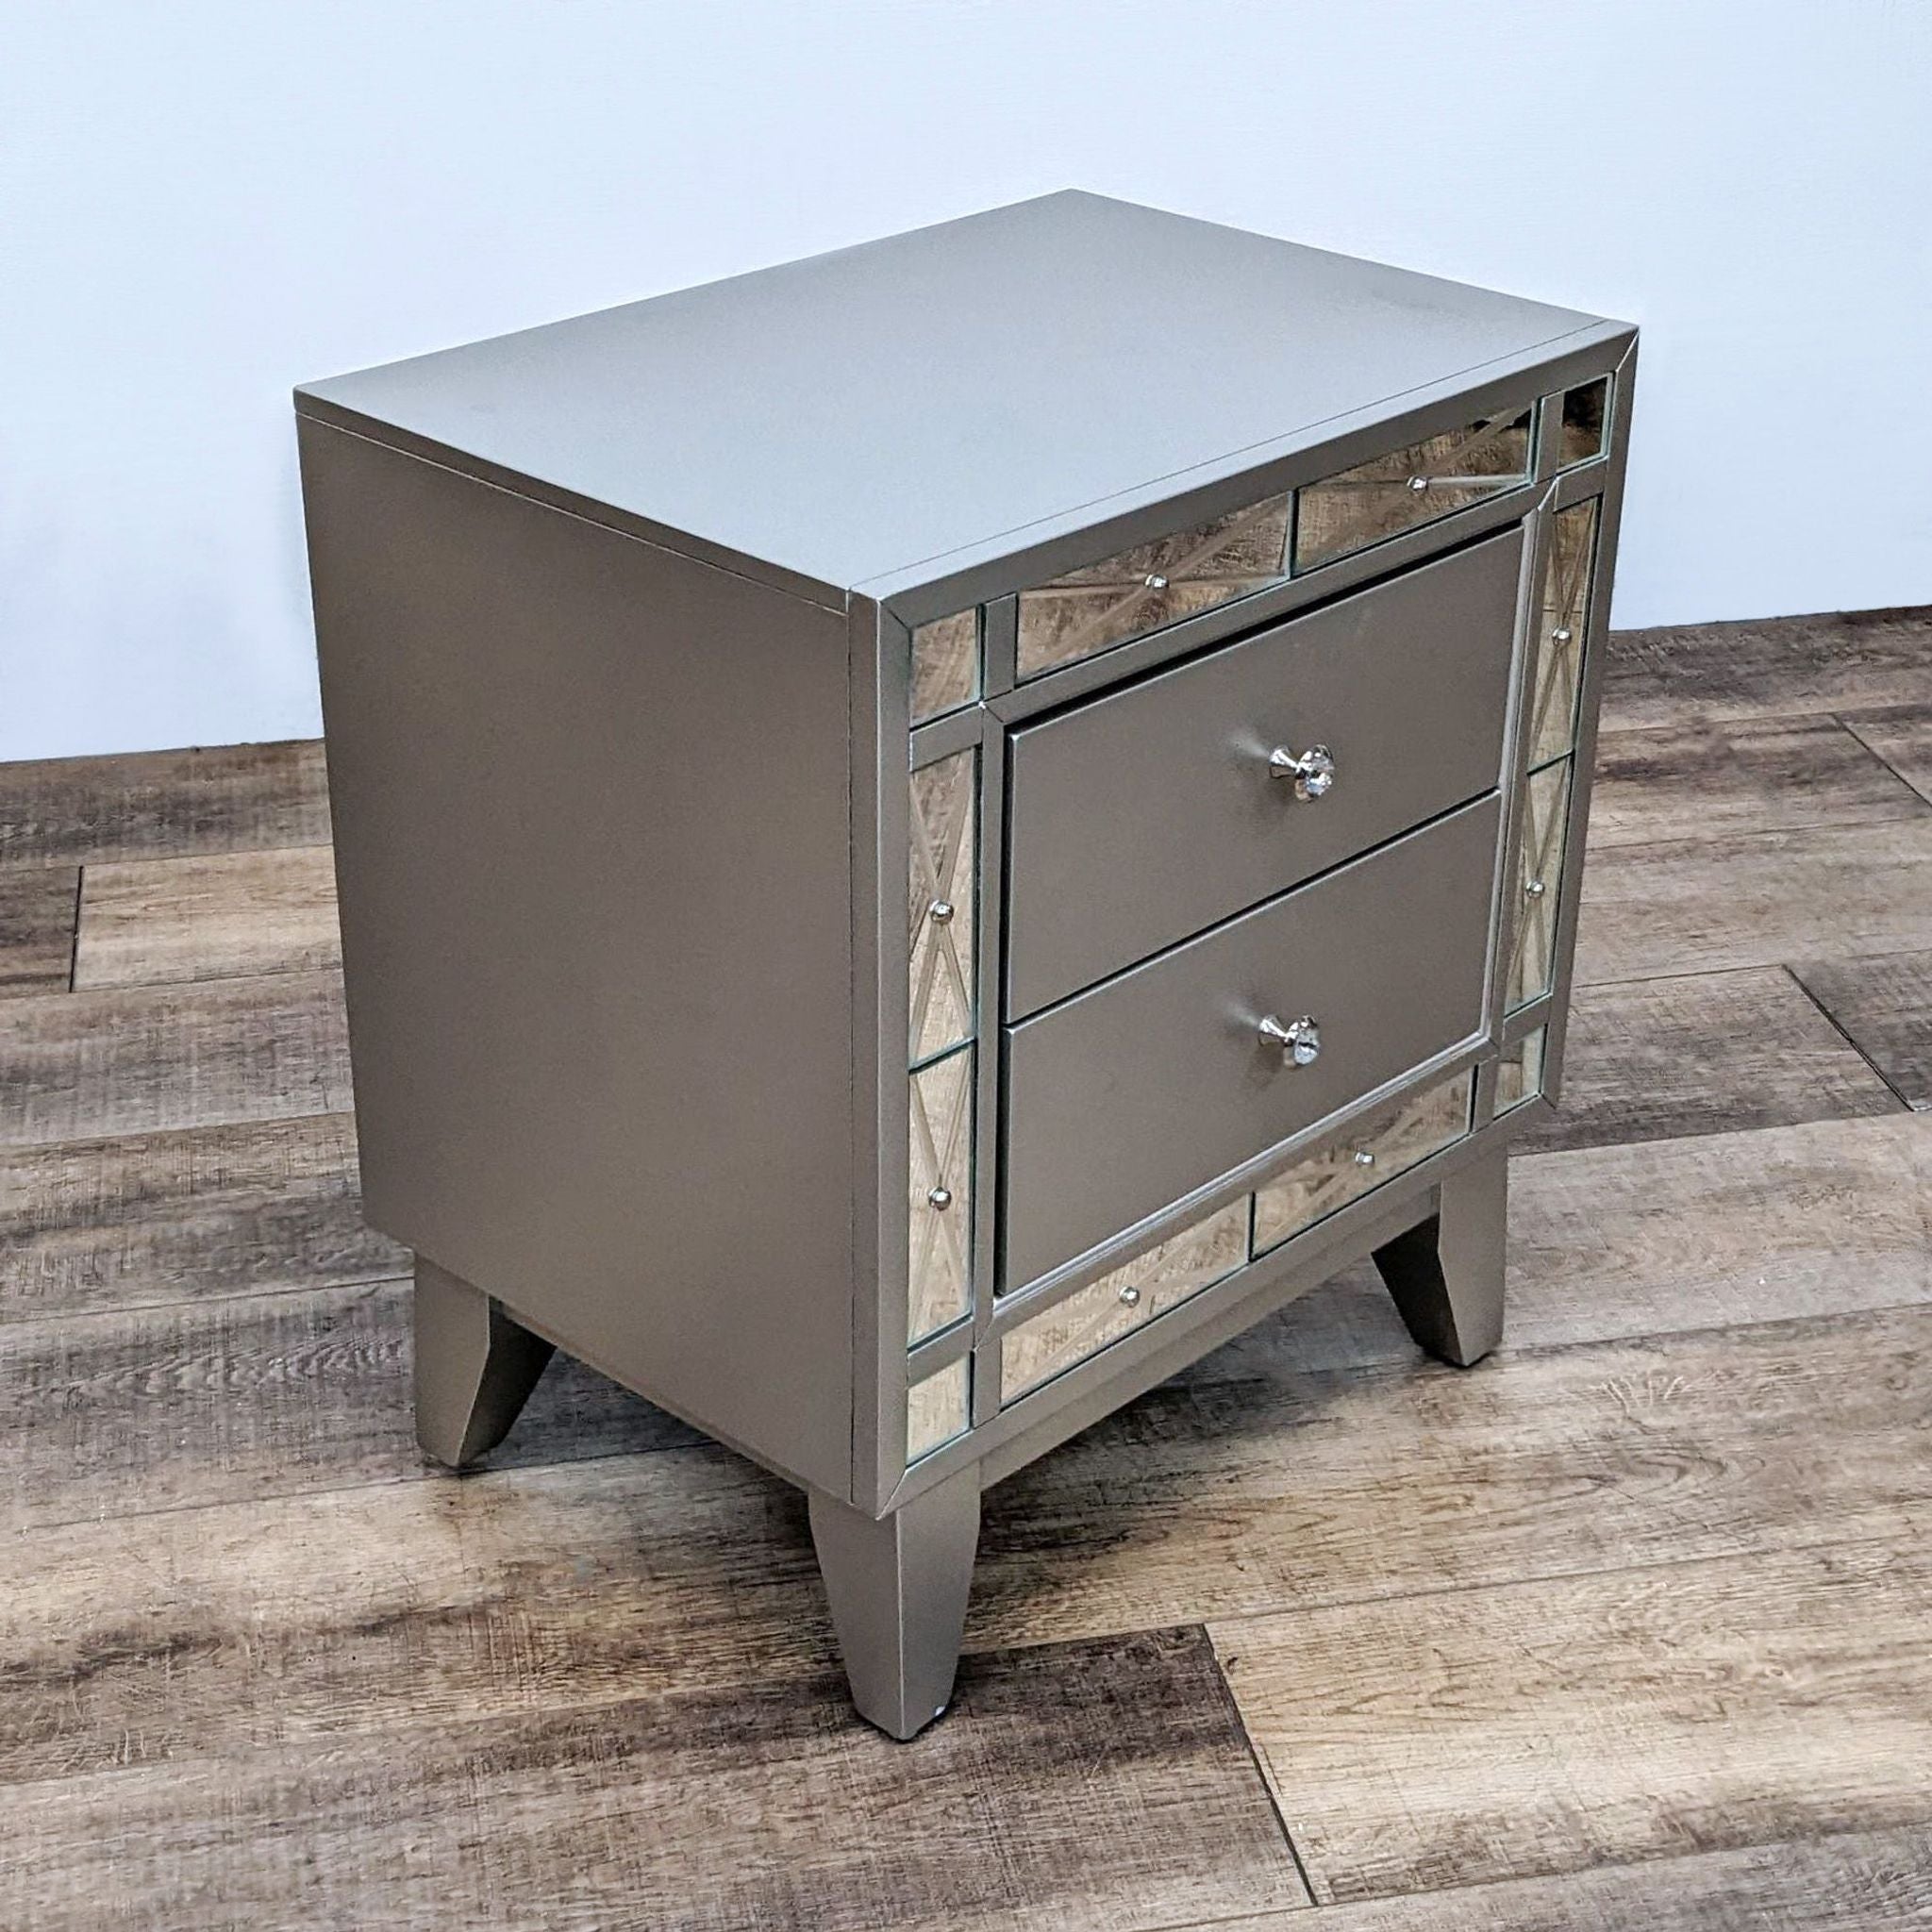 Transitional two-drawer Coaster Fine Furniture end table with retro angled legs and etched mirror panels, finished in metallic mercury.